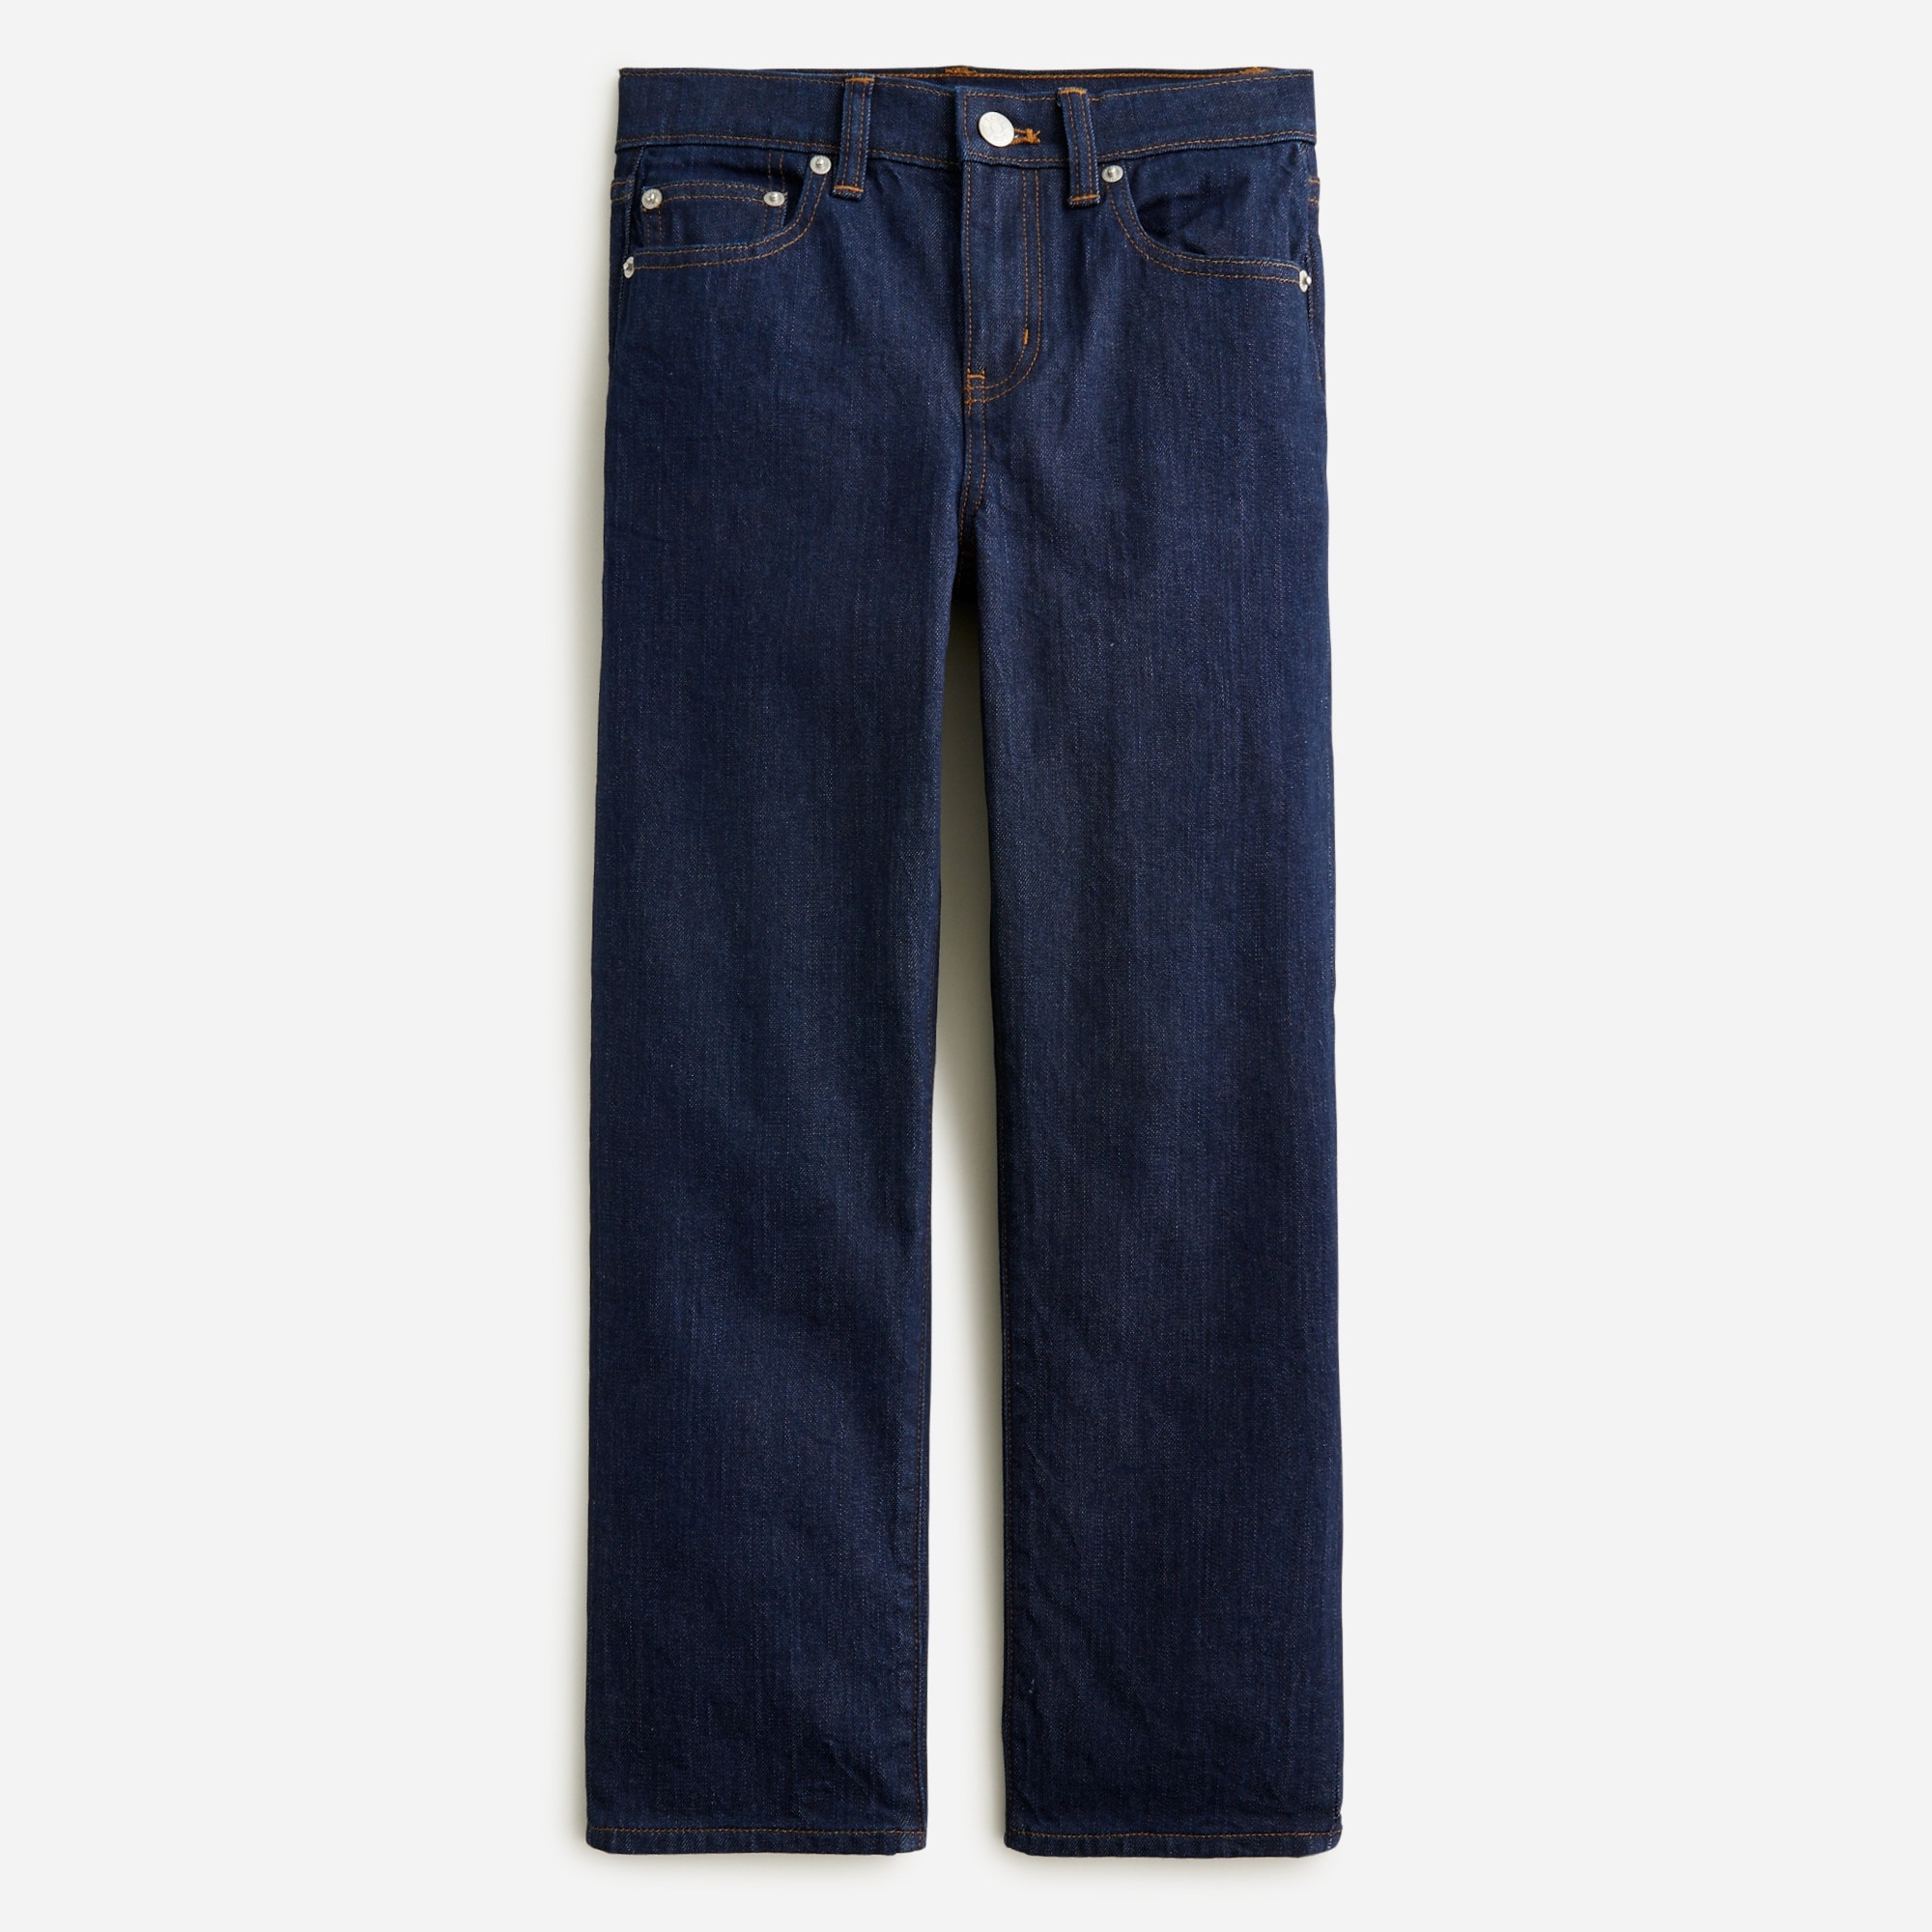  Boys' relaxed-fit stretch jean in Salton wash